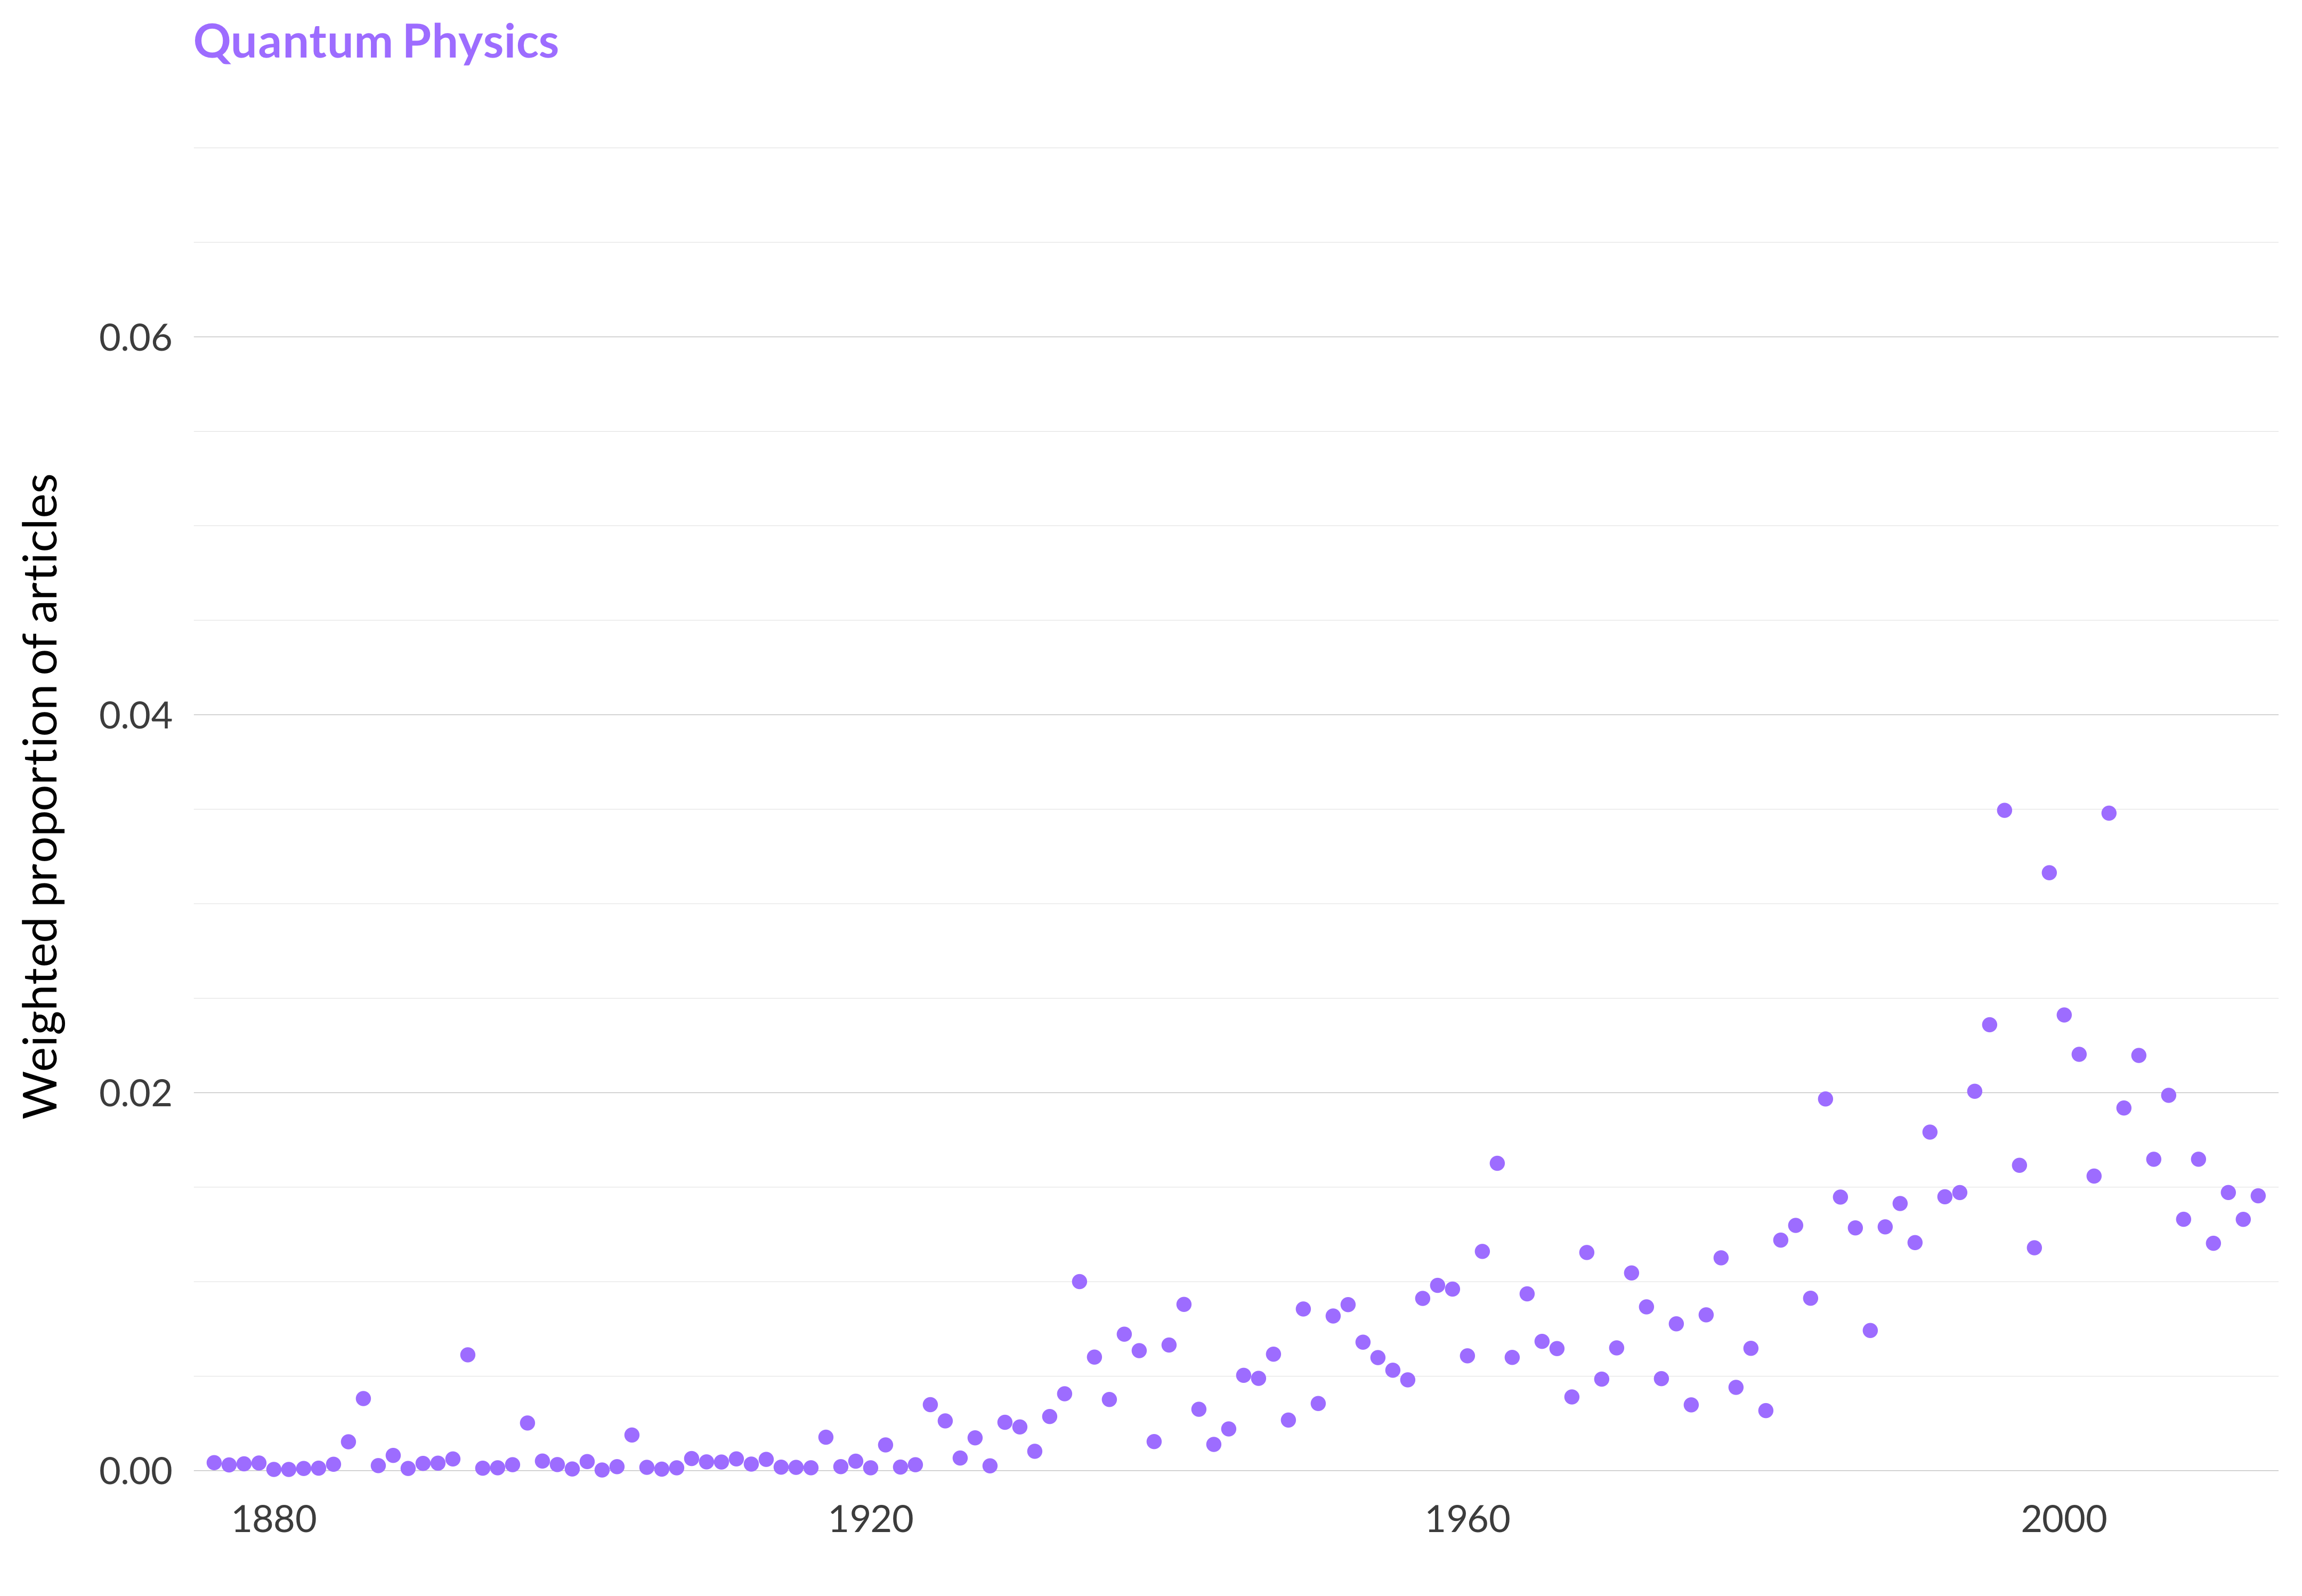 A scatterplot showing which proportion of articles each year are in the quantum physicstopic. The x-axis shows the year, the y-axis measures the proportion of articles each year in this topic. There is one dot per year. The highest value is in 1996 when 3.5% of articles were in this topic. The lowest value is in 1902 when 0.0% of articles were in this topic. The full table that provides the data for this graph is available in Table A.66 in Appendix A.